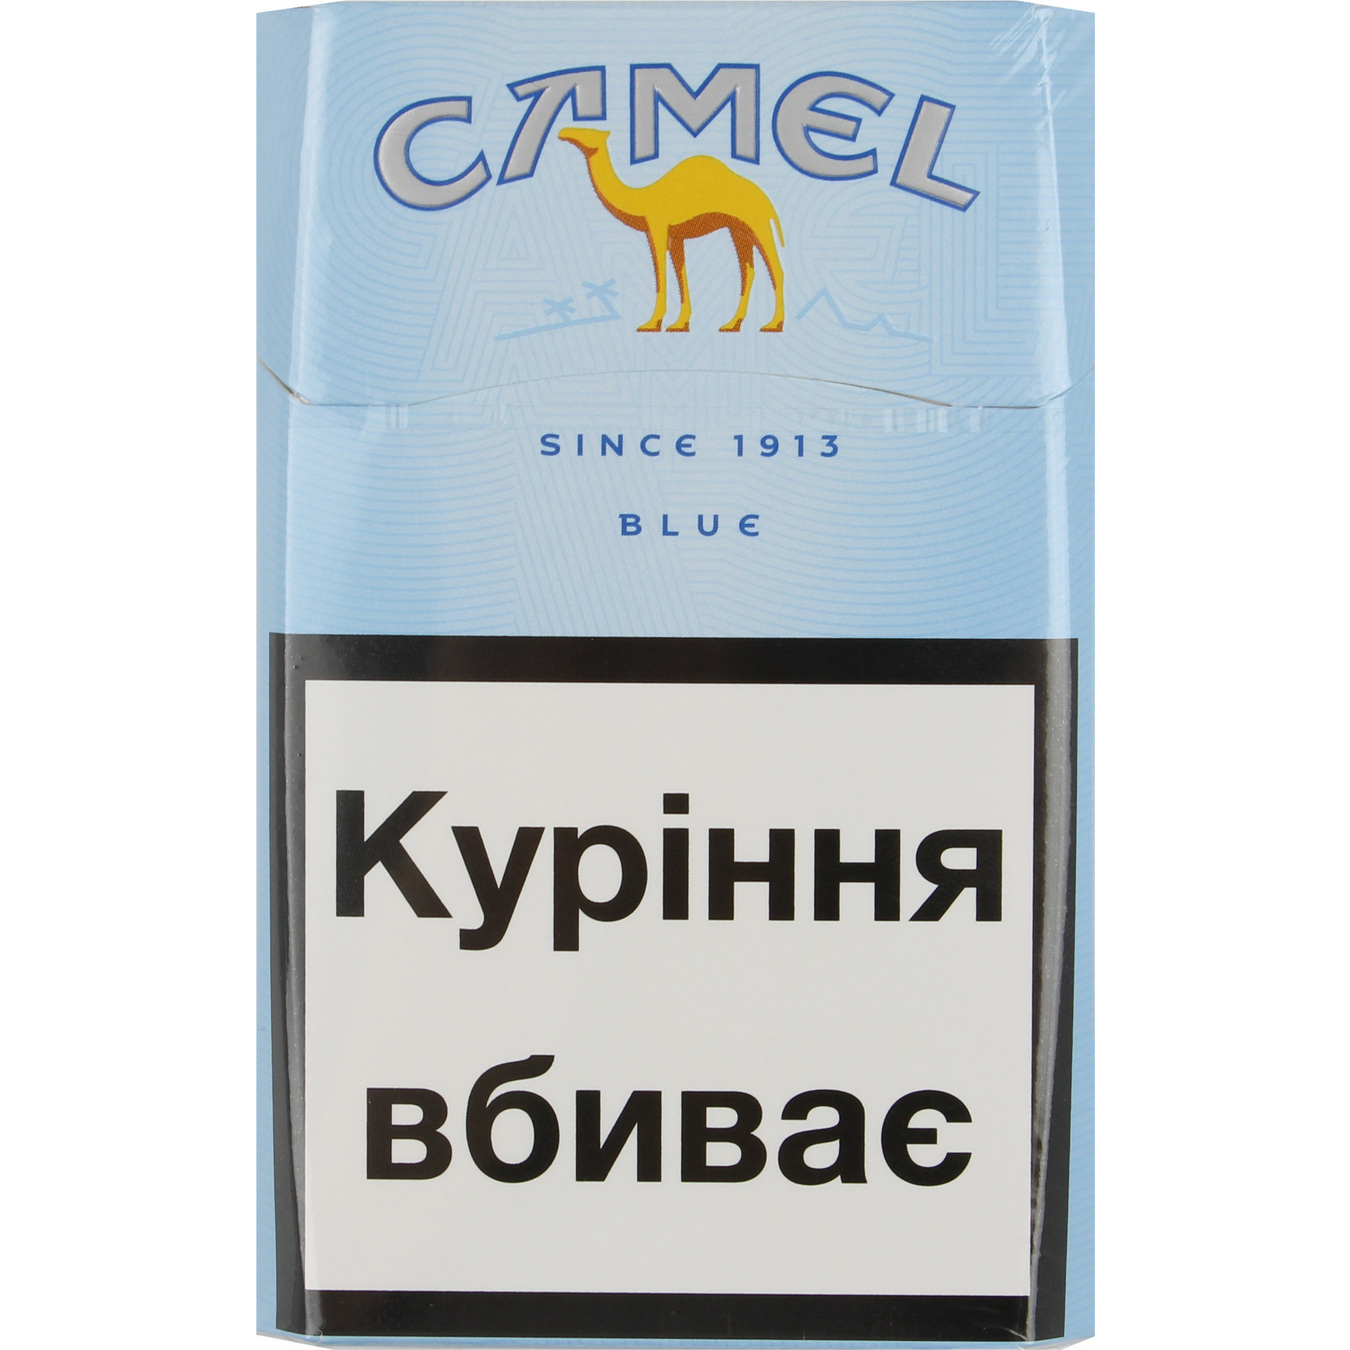 Camel Blue Cigarettes 20 pcs (the price is indicated without excise tax)